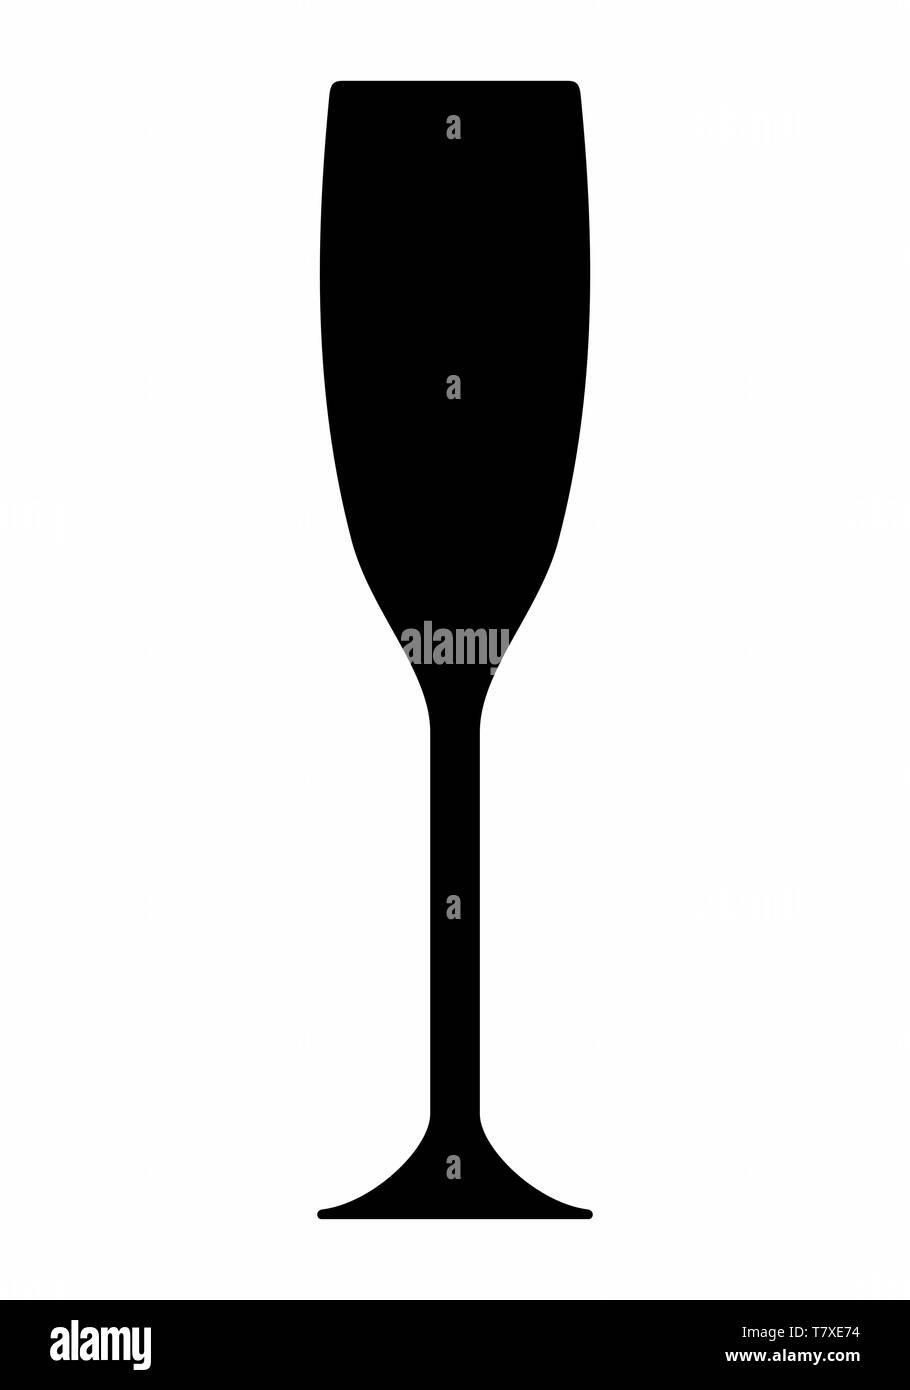 Champagne glass dark silhouette isolated on white background Stock Vector